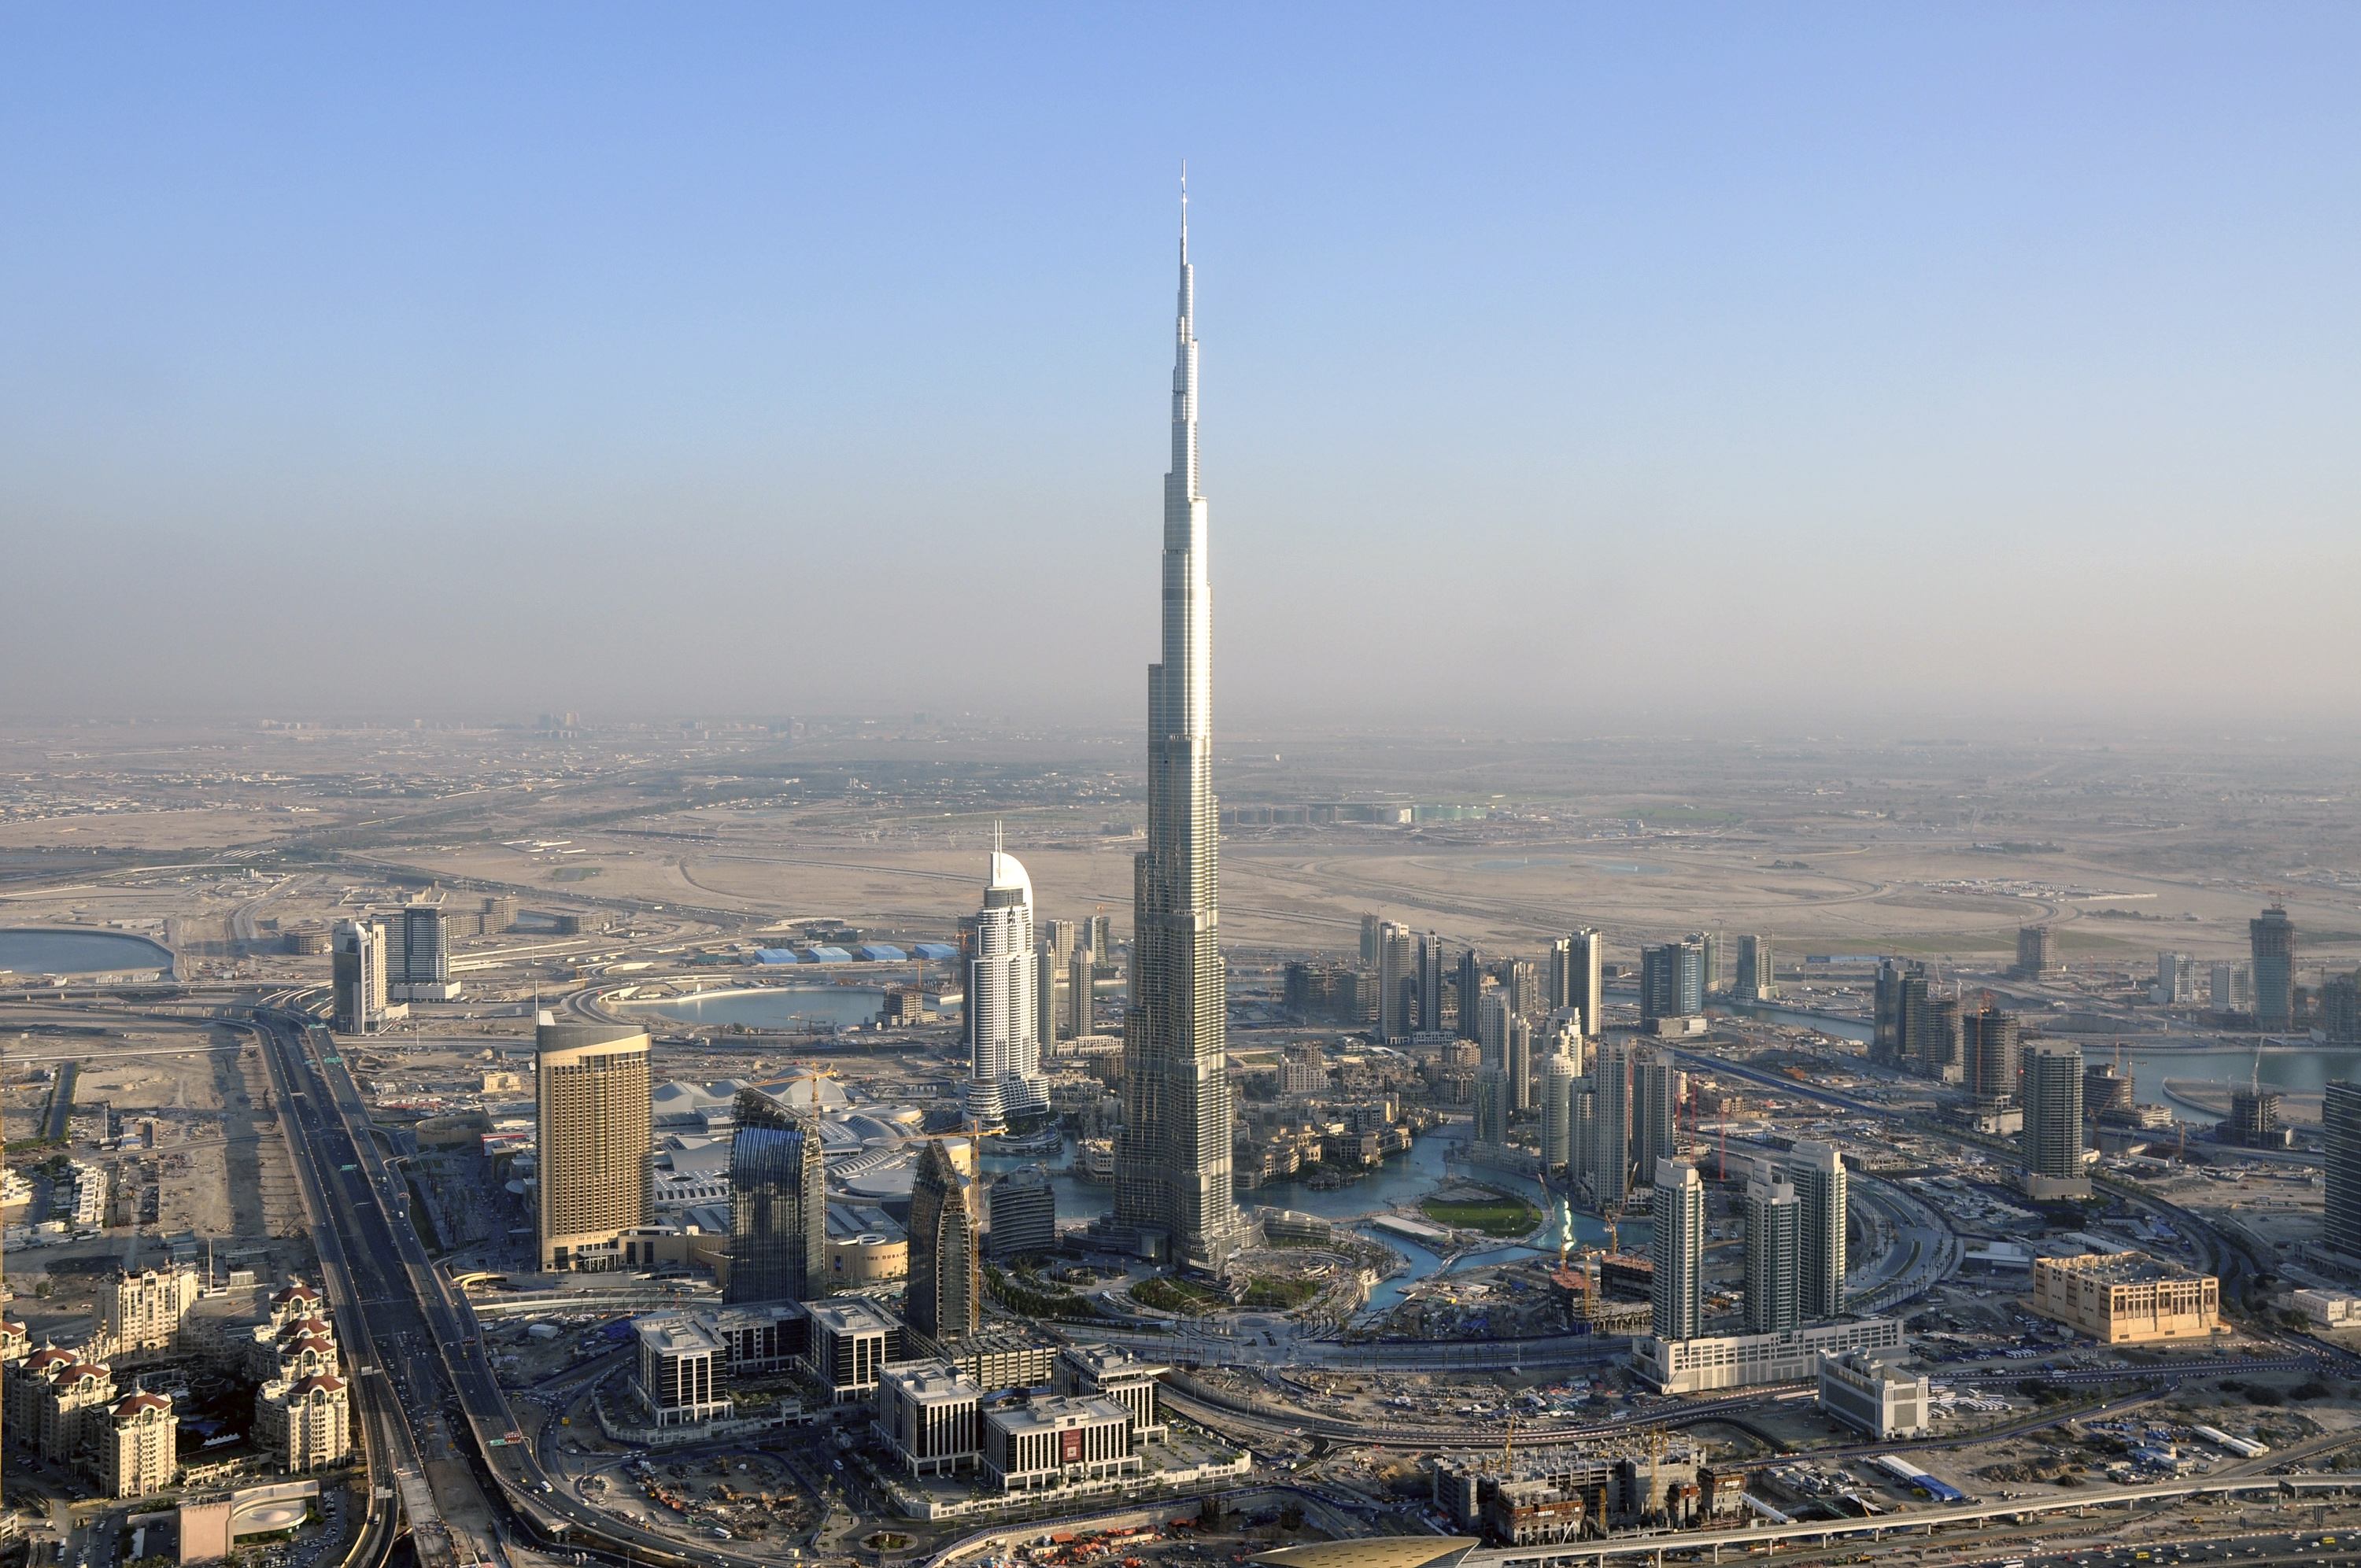 A Collection of the World’s Tallest Buildings, Hope You’re Not Scared of Heights